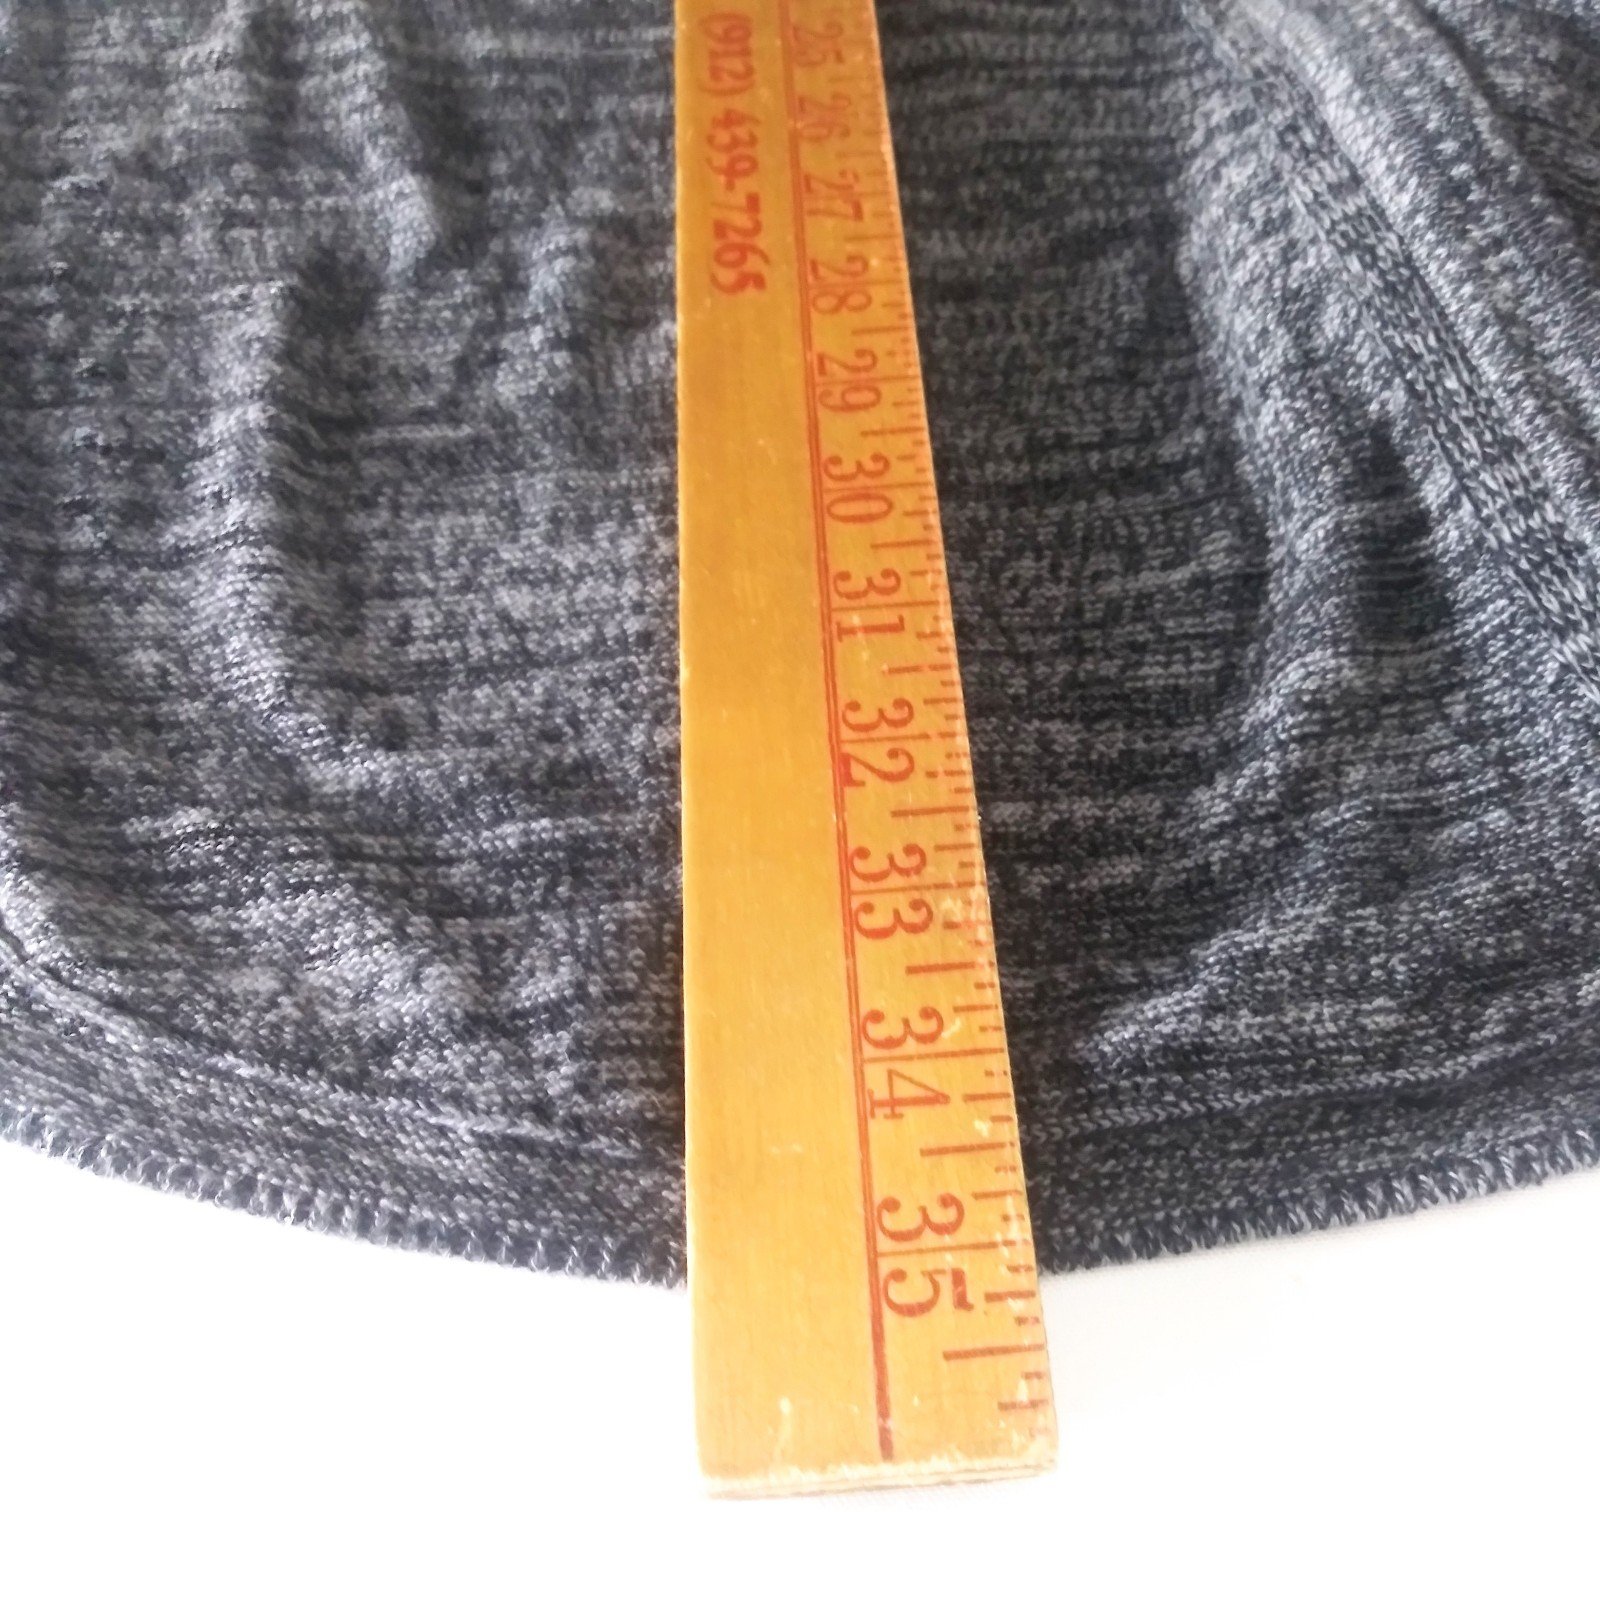 Perfect J. Jill Pure Jill Cardigan Sweater Size M Heather Gray Long Sleeve Open Front Nc7QVq3v1 for sale